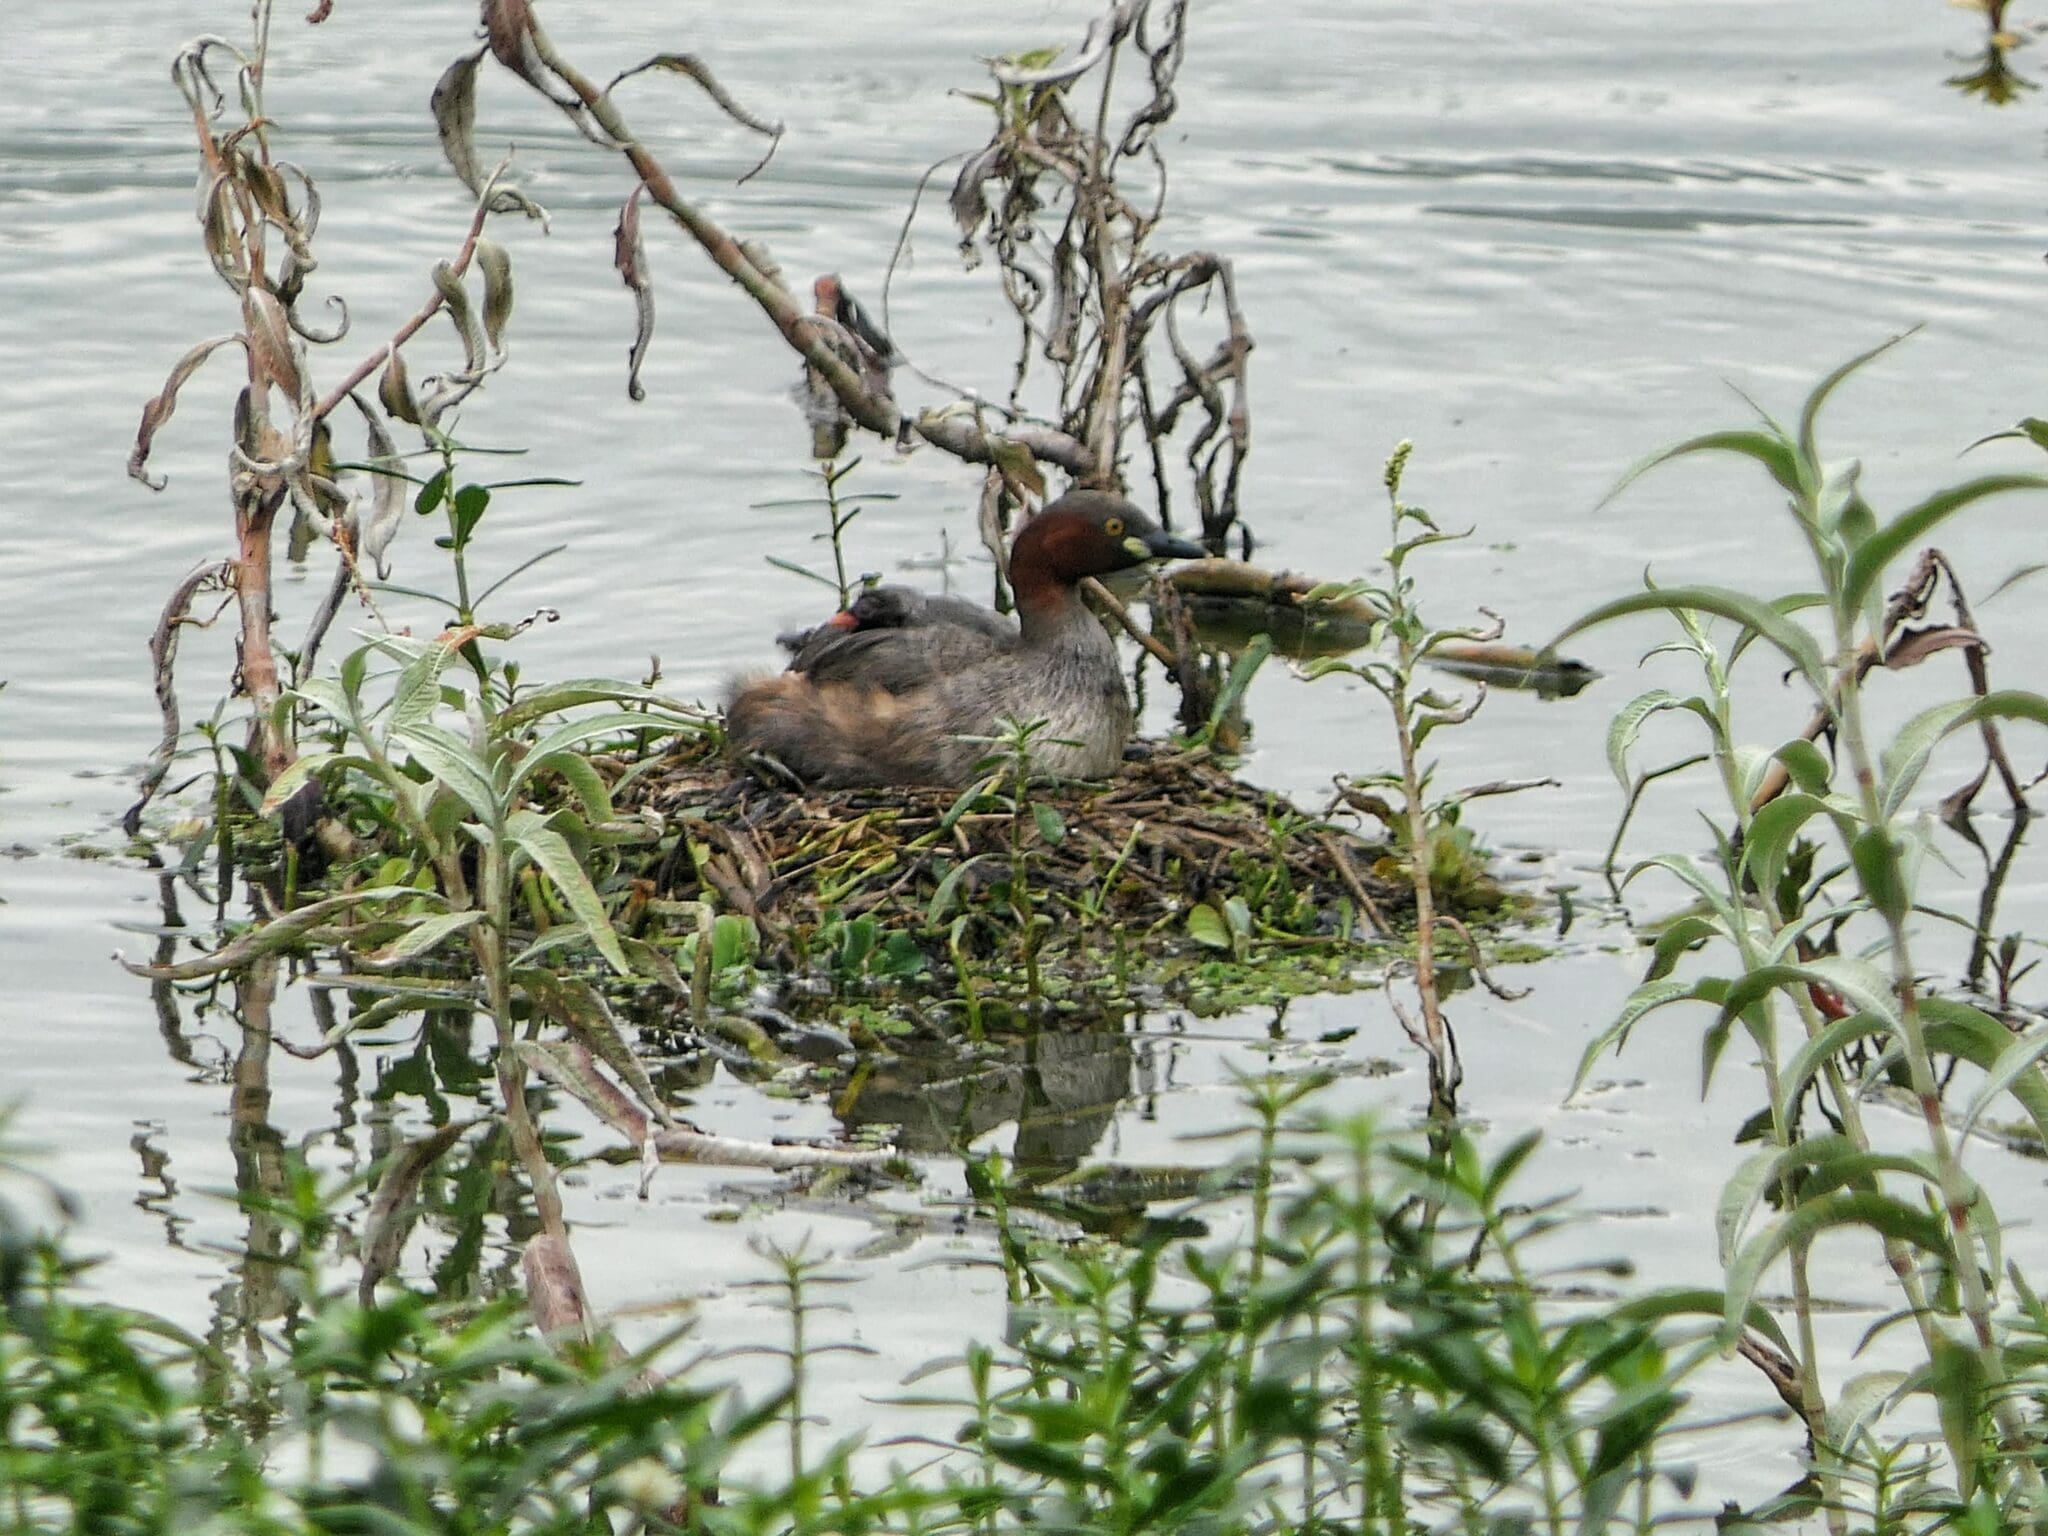 A Little Grebe on its nest in the wetland